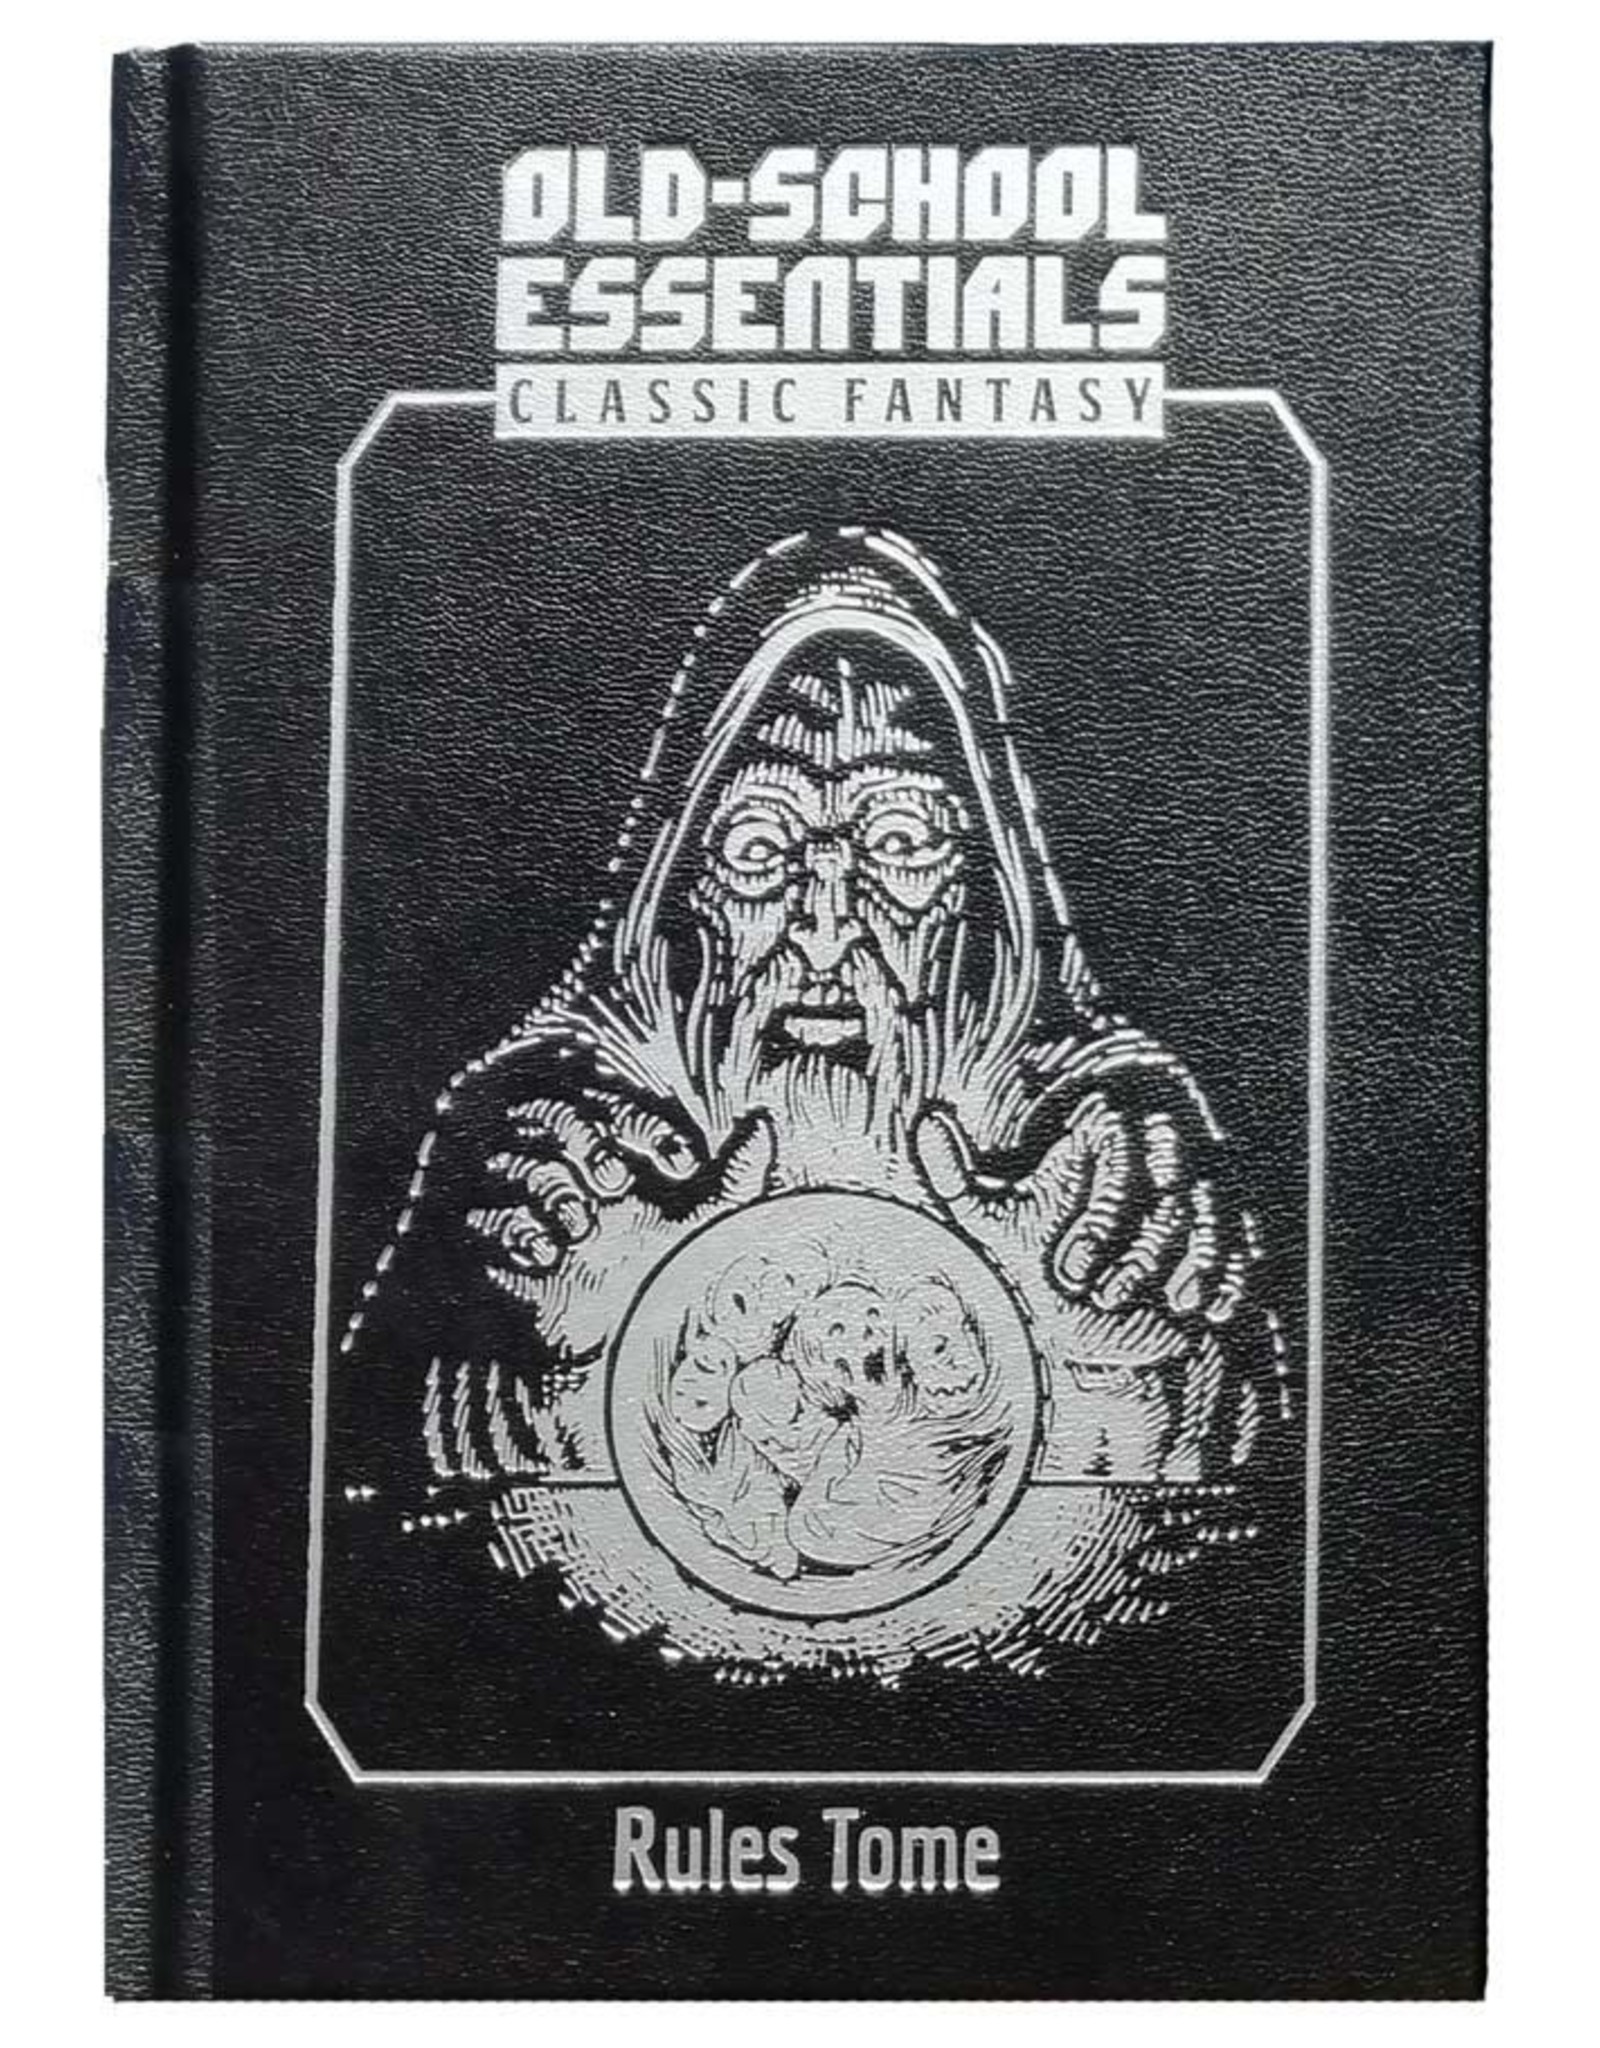 Exalted Funeral Press Old-School Essentials: Classic Fantasy - Rules Tome (2nd Print) LE